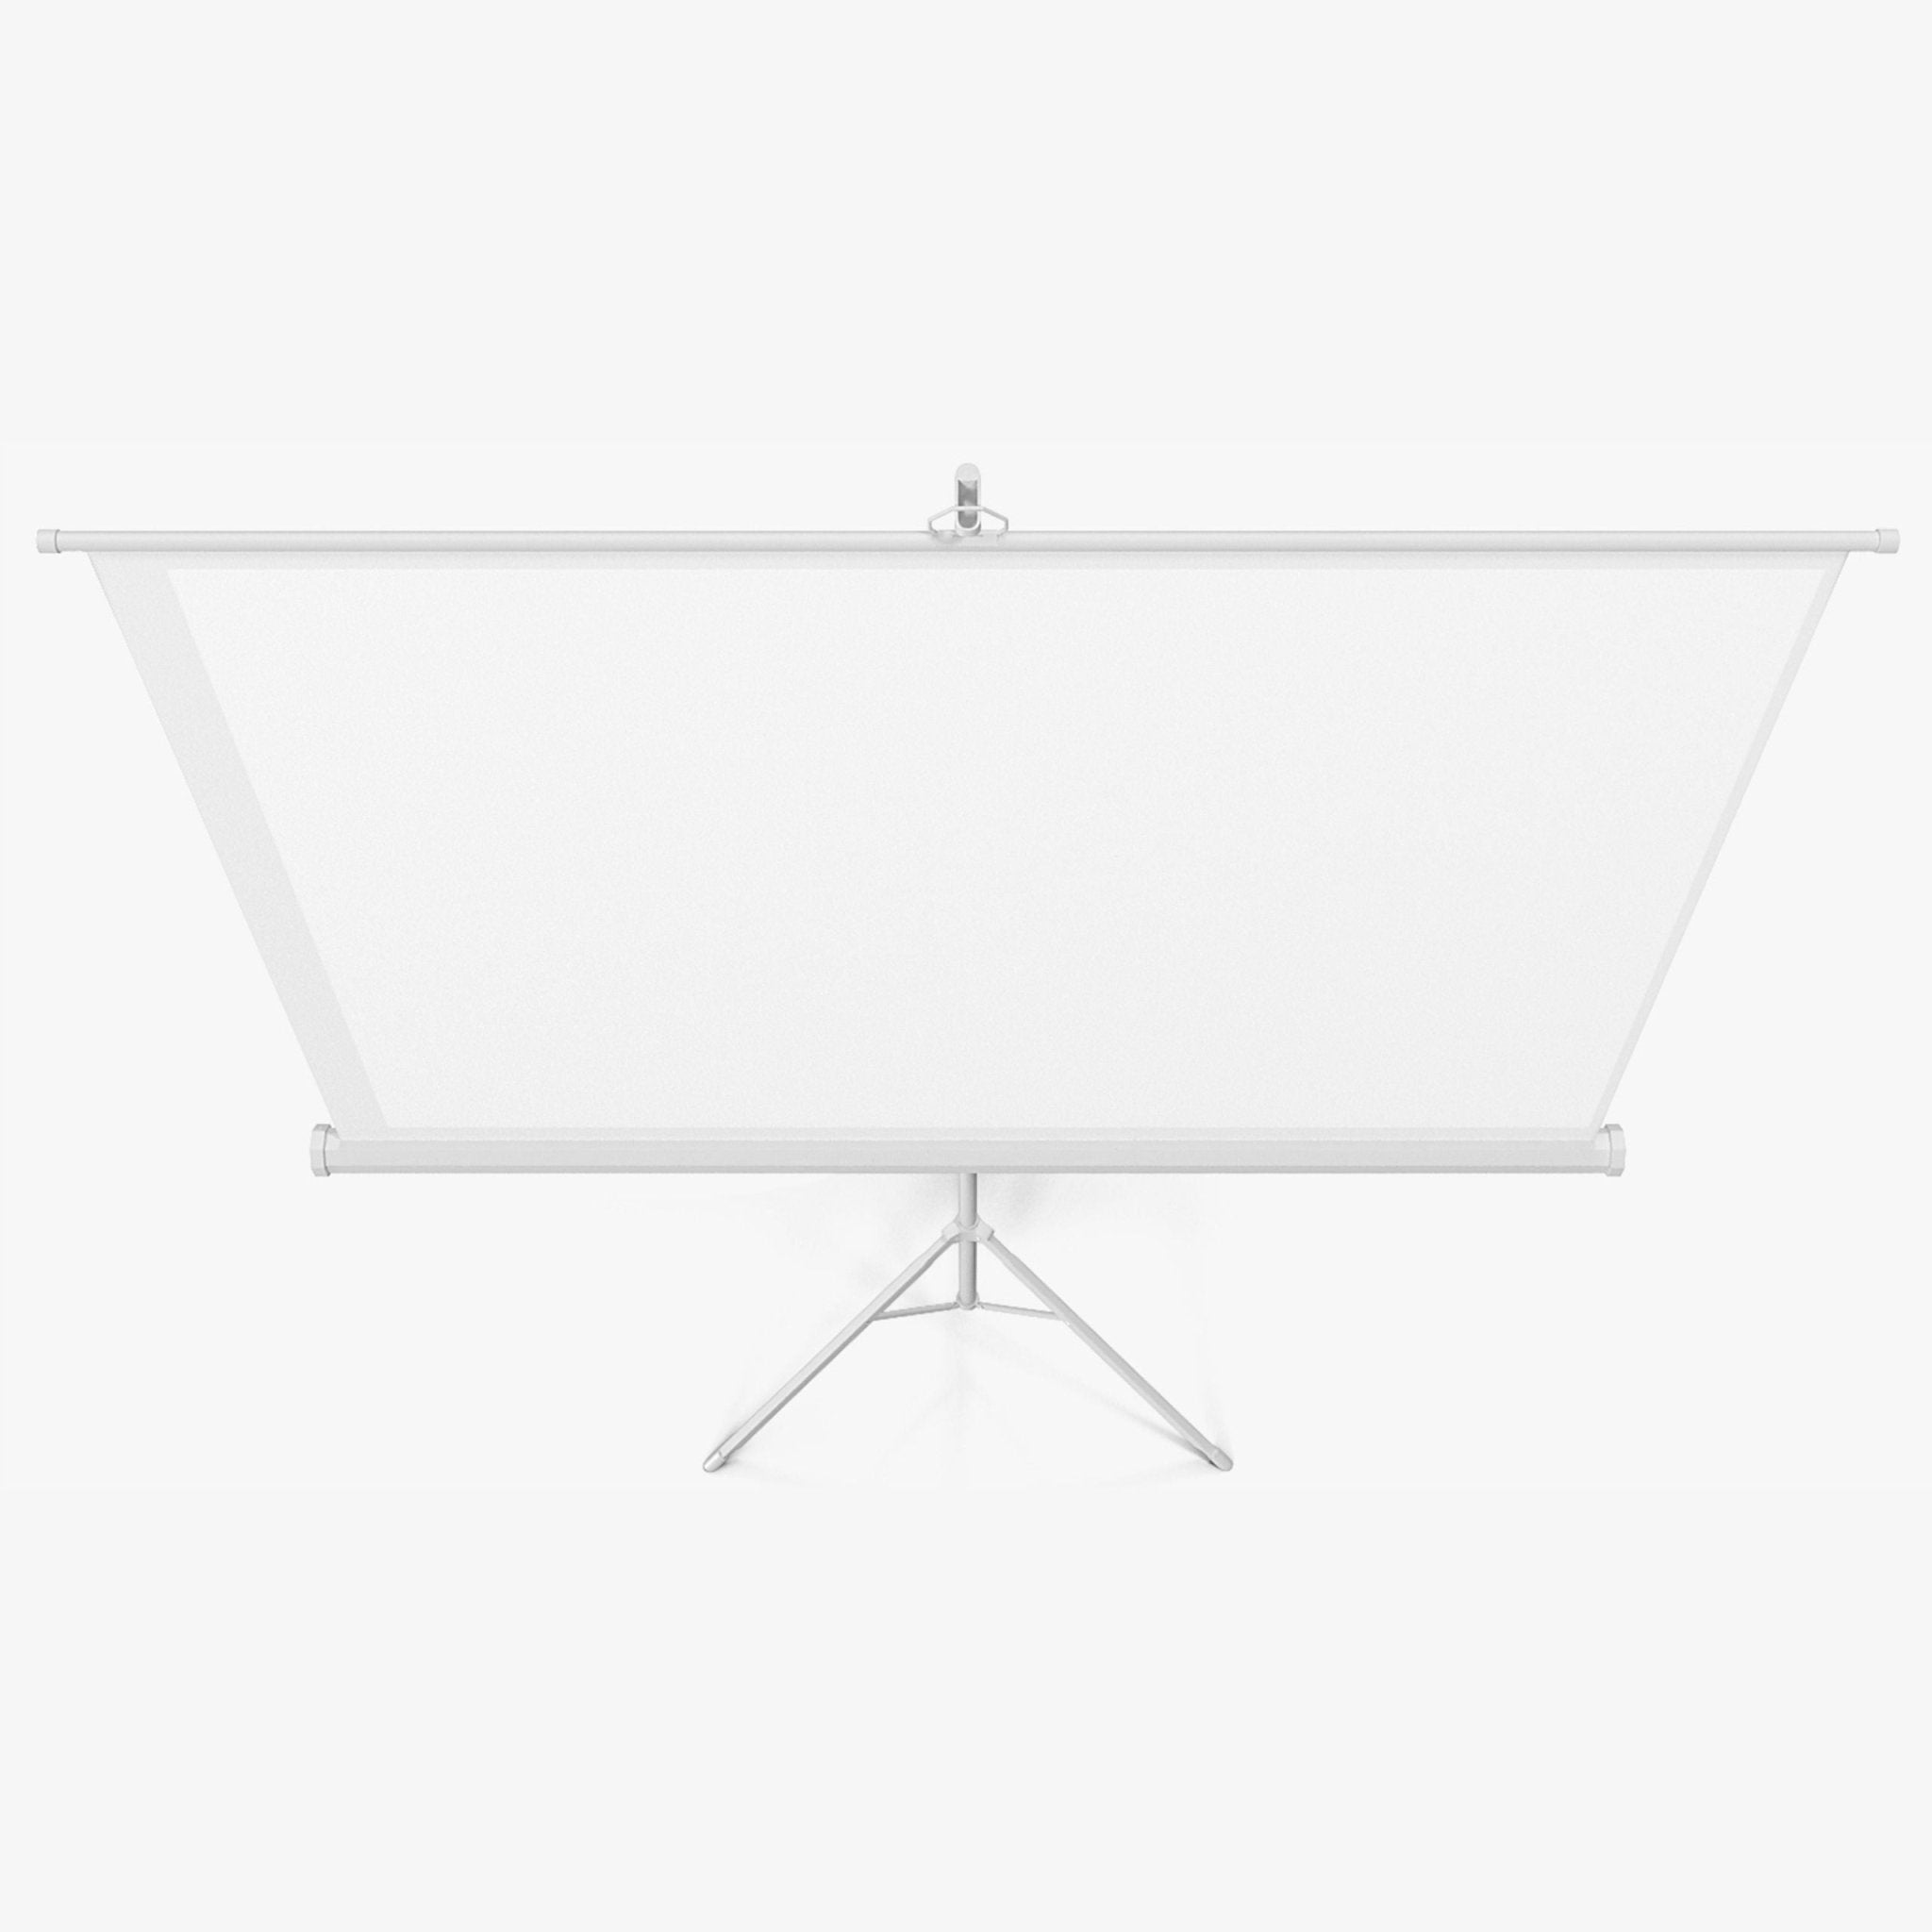 ANC Bright Projection Screen